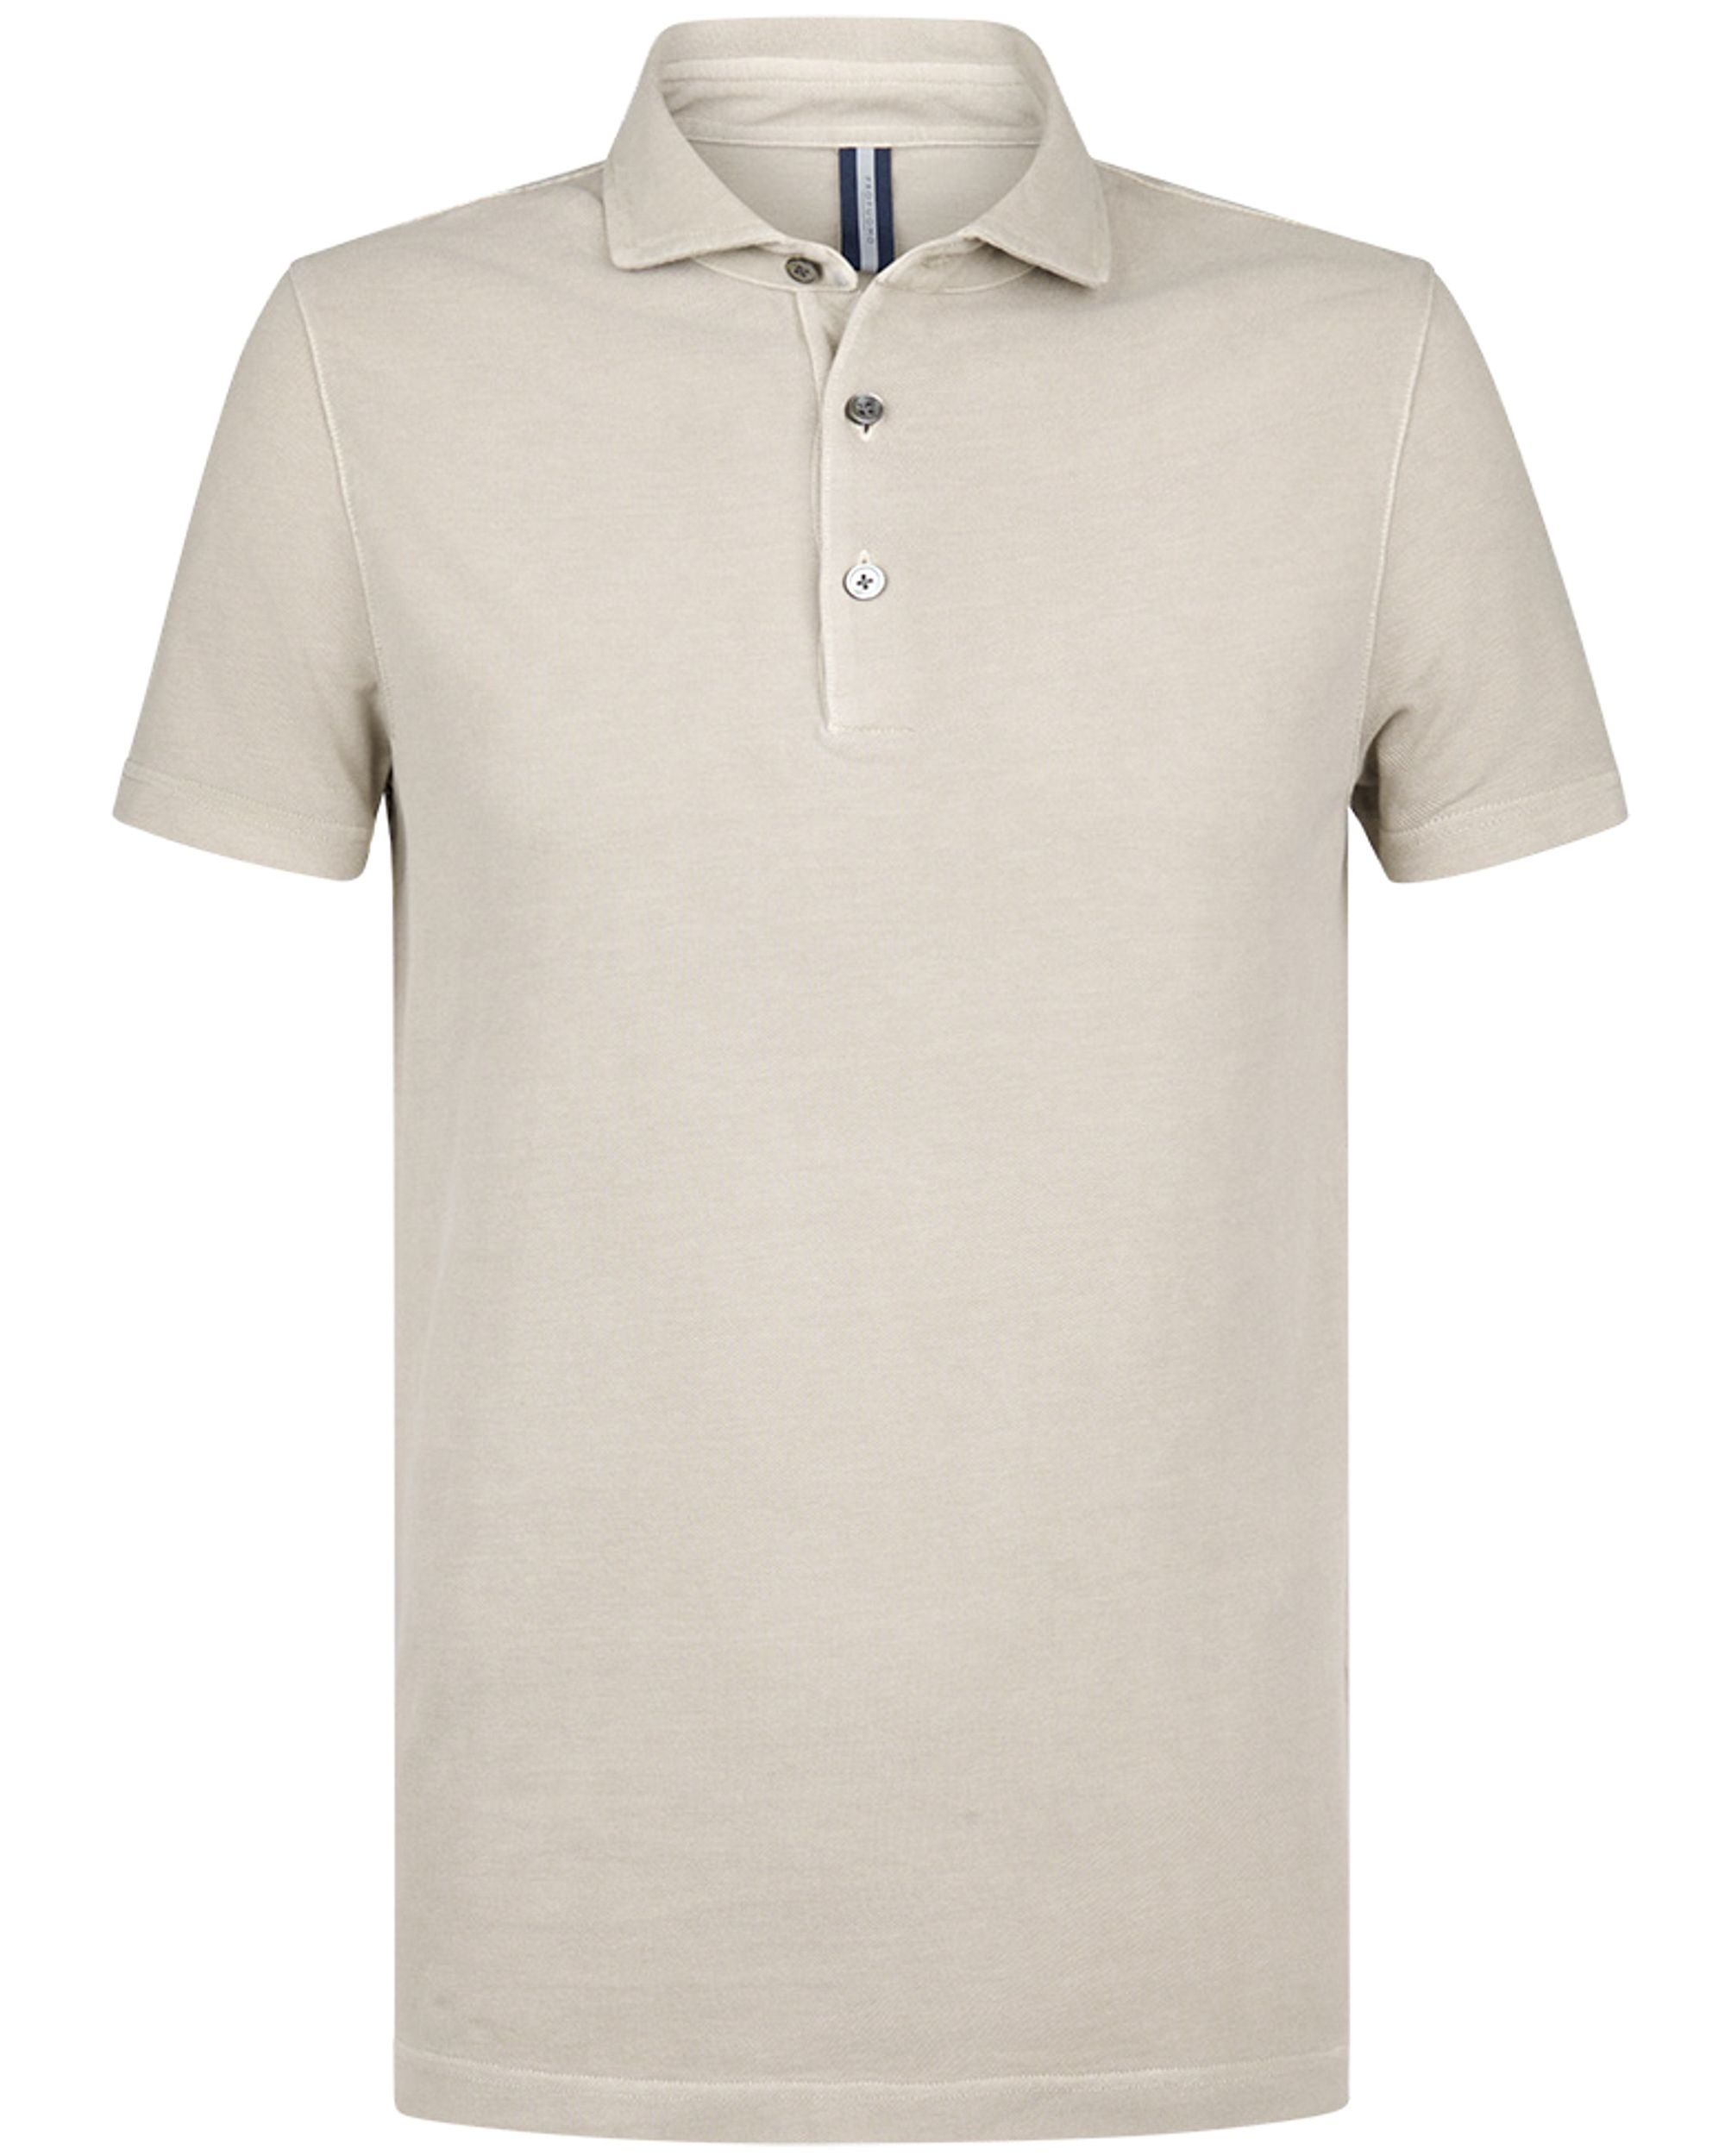 Profuomo Polo KM Donker rood 094178-001-L